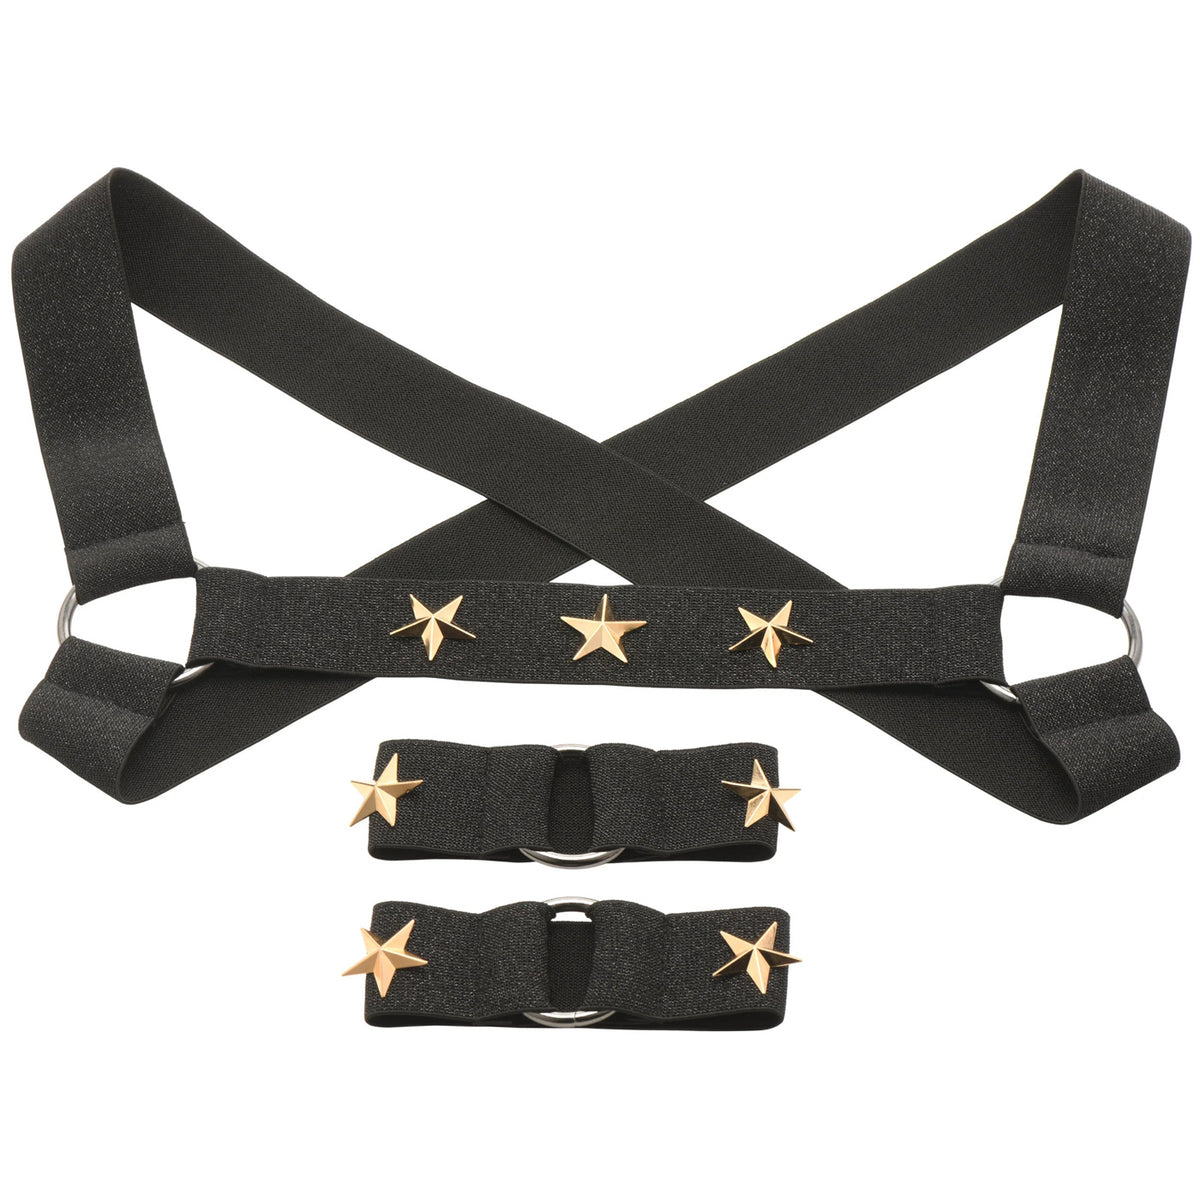 Star Boy Male Chest Harness With Arm Bands -  Small/medium - Black